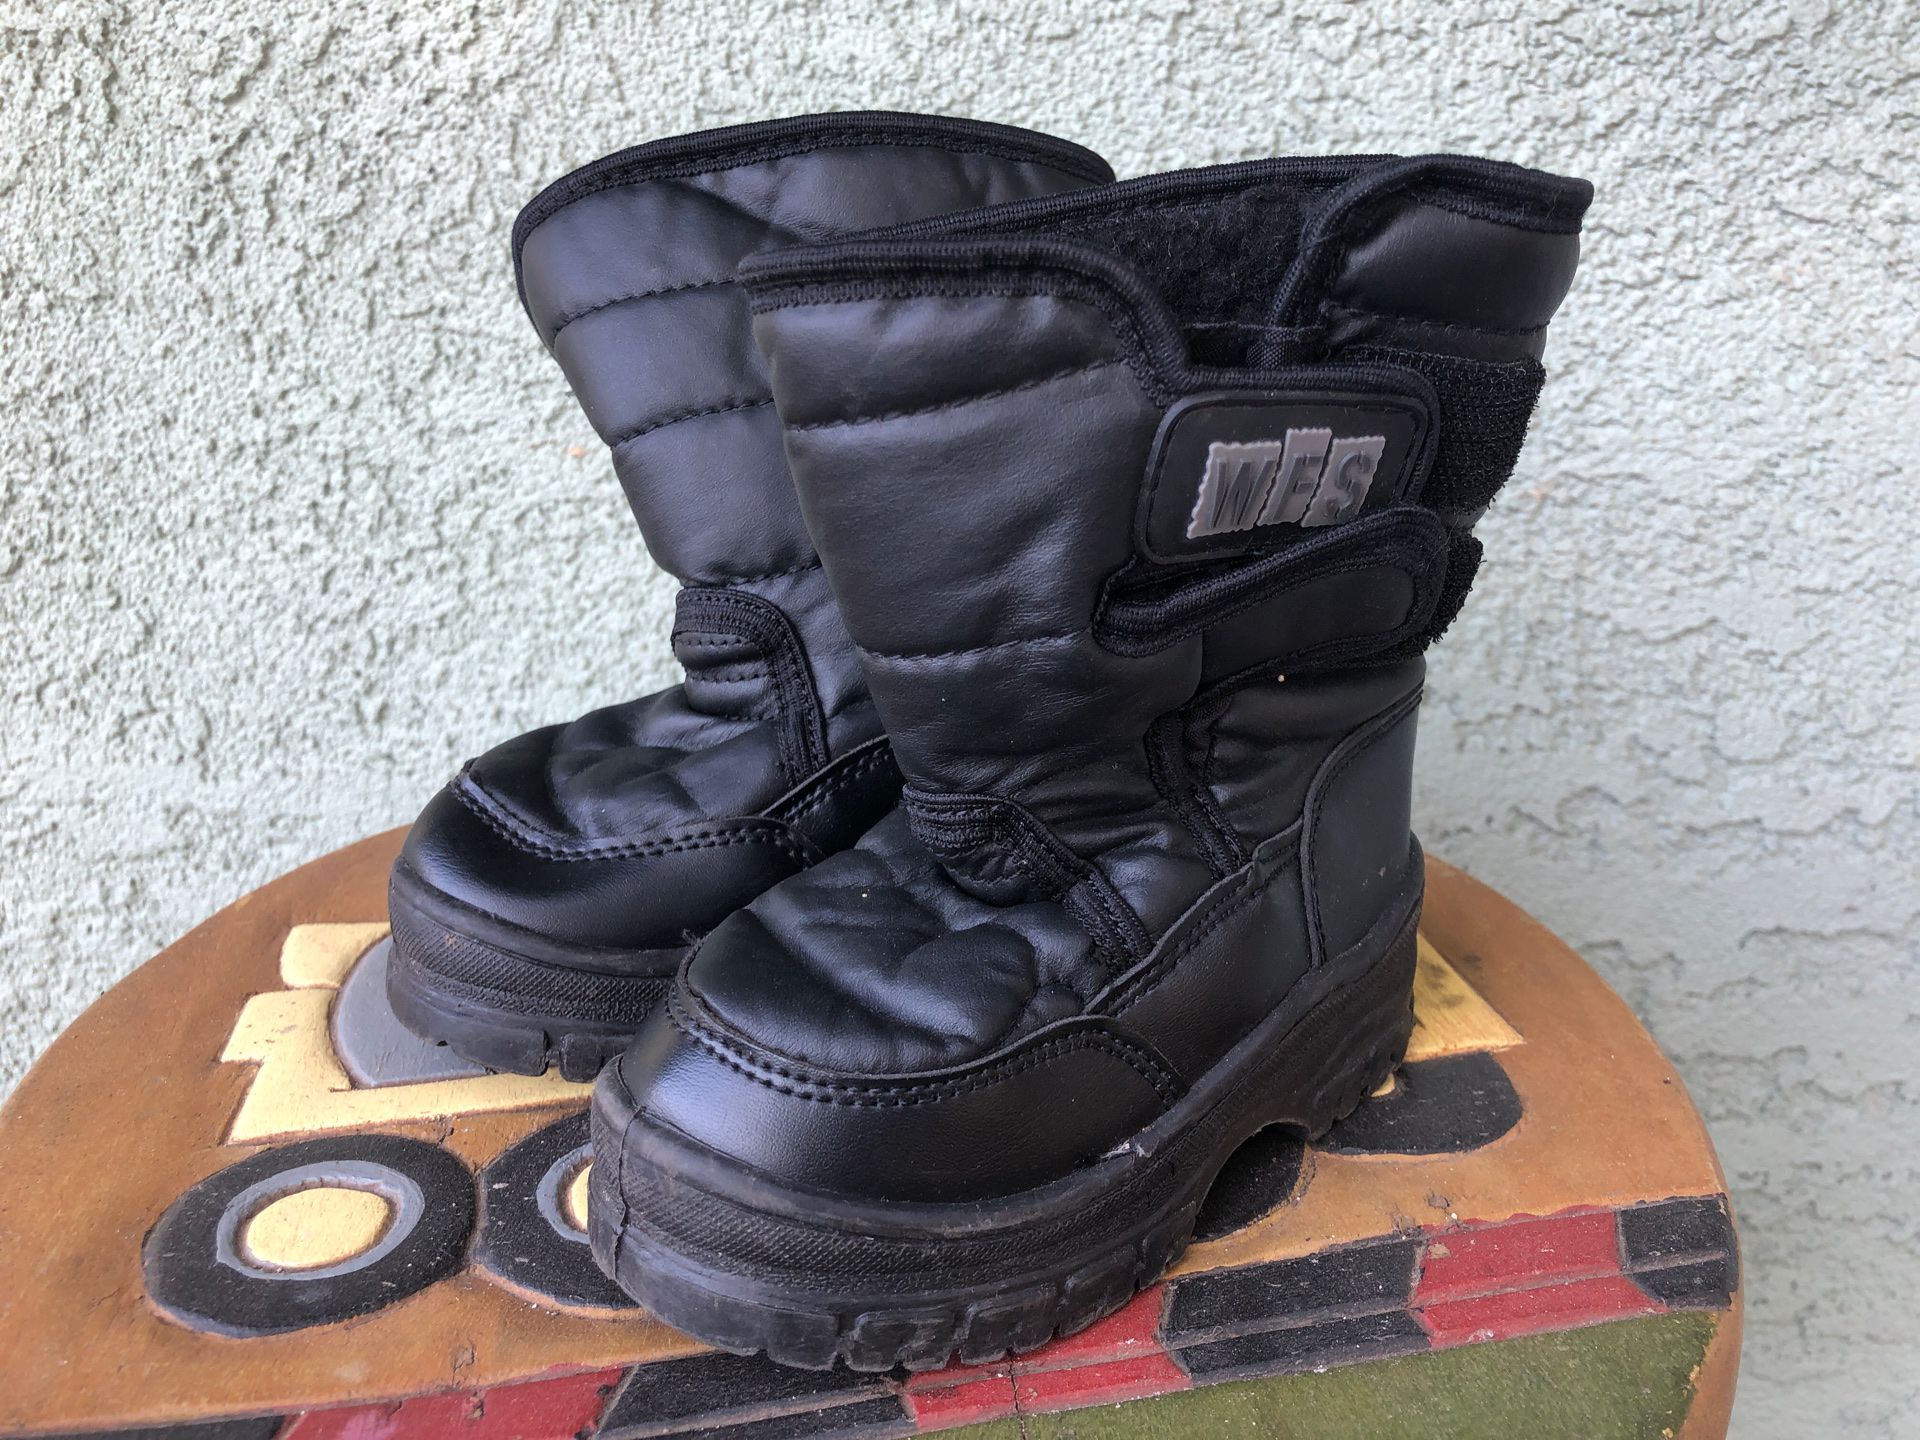 Toddler snow boots, Size 5, WFS brand